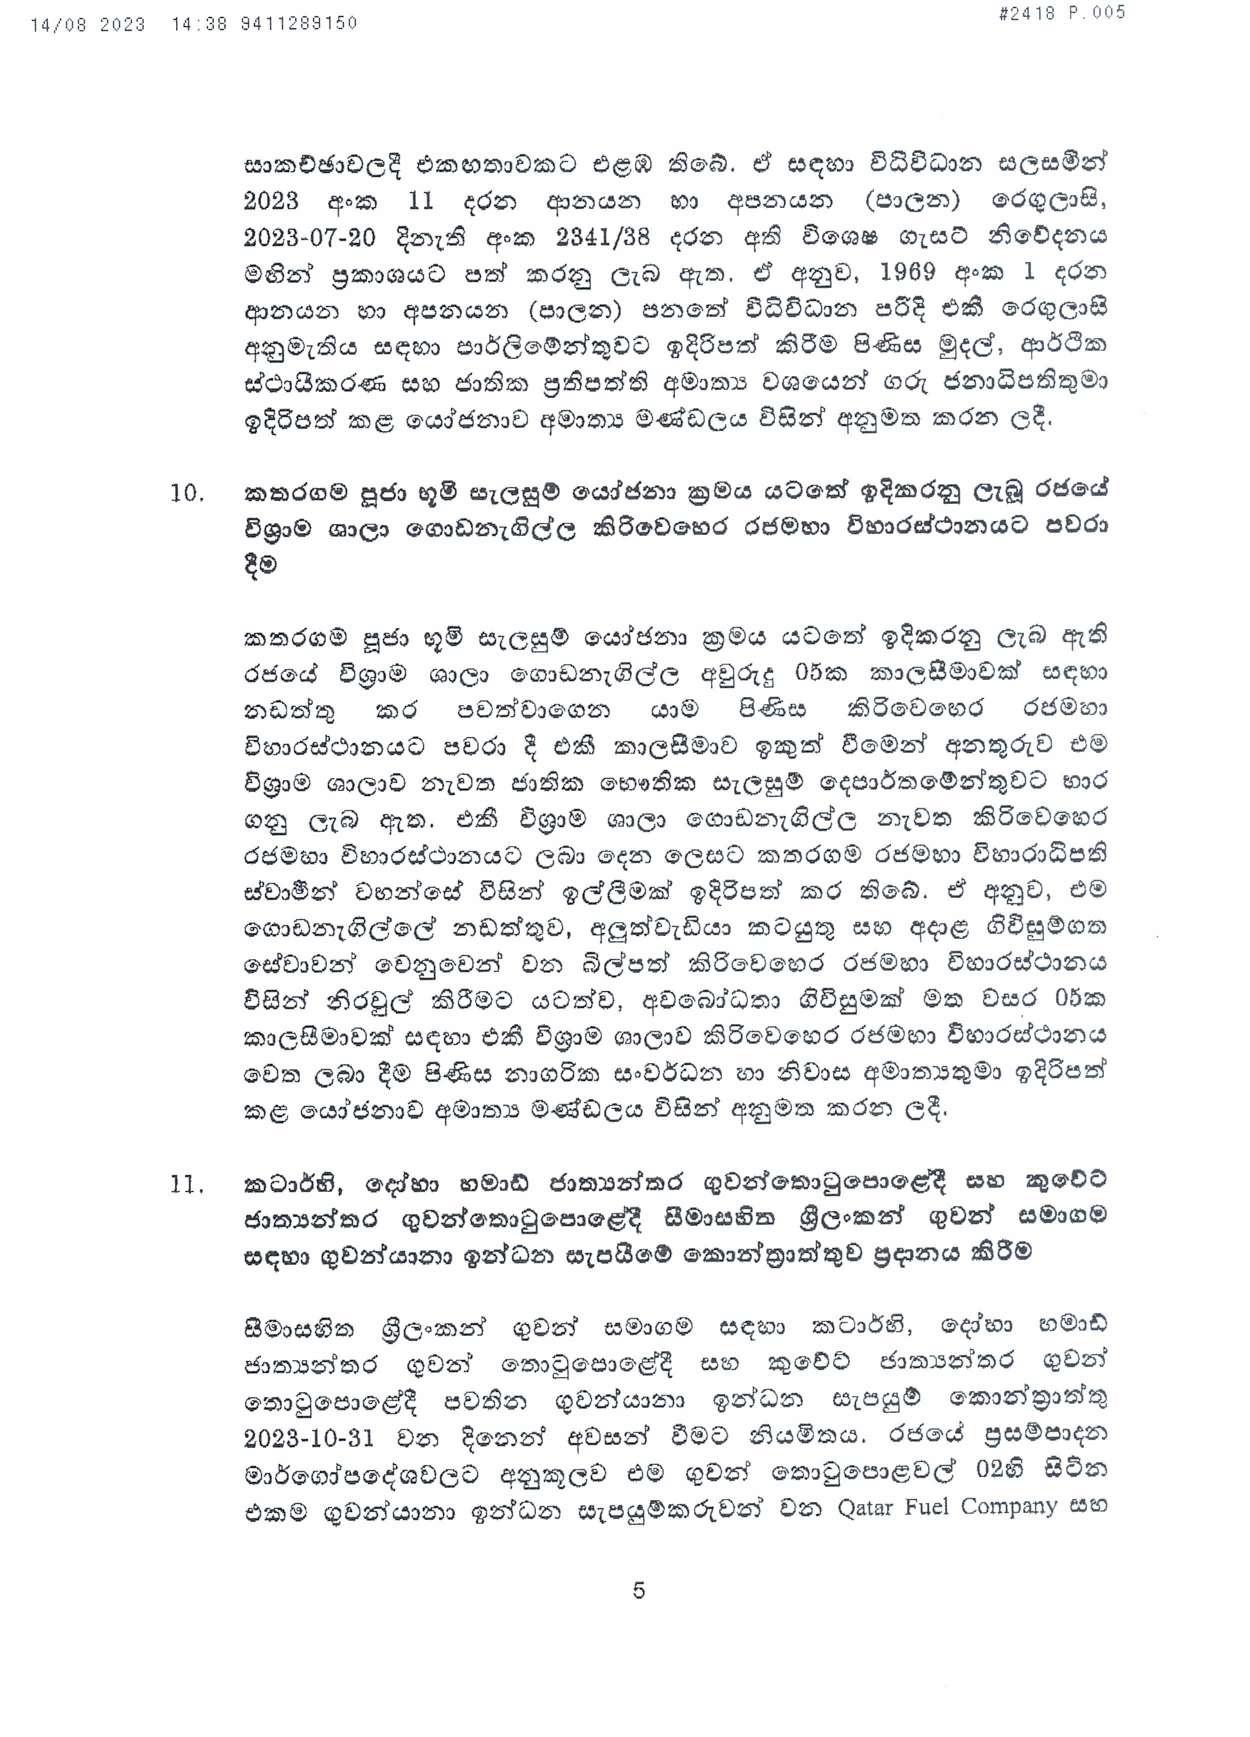 Cabinet Decision on 14.08.2023 1 page 005